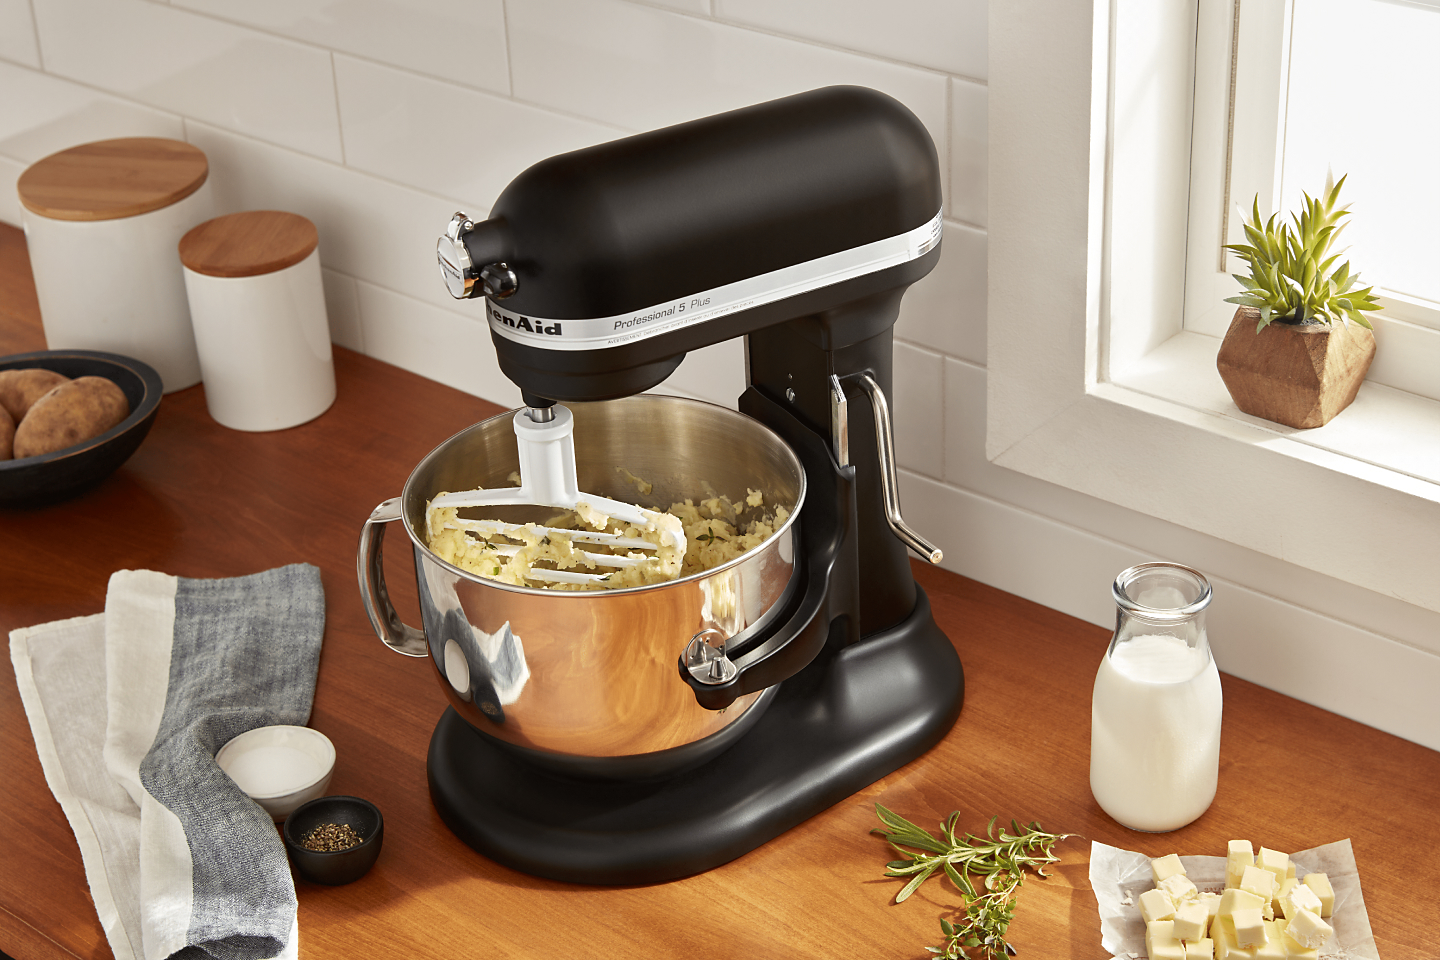 https://kitchenaid-h.assetsadobe.com/is/image/content/dam/business-unit/kitchenaid/en-us/marketing-content/site-assets/page-content/pinch-of-help/how-to-make-mashed-potatoes-with-a-stand-mixer/Mashed-Potato-Stand-Mixer_1.jpg?fmt=png-alpha&qlt=85,0&resMode=sharp2&op_usm=1.75,0.3,2,0&scl=1&constrain=fit,1